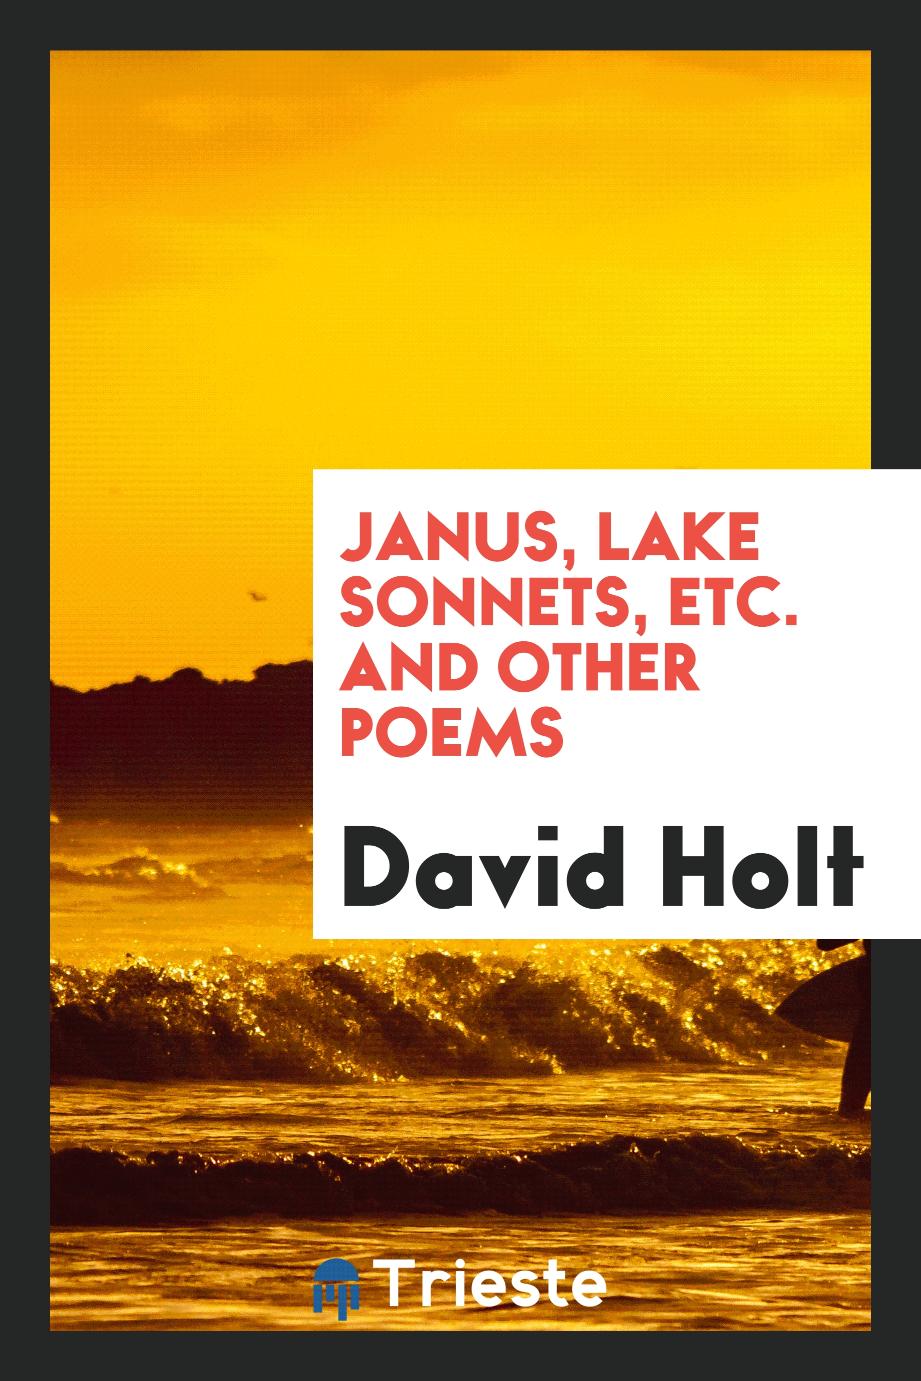 Janus, Lake sonnets, etc. and other poems